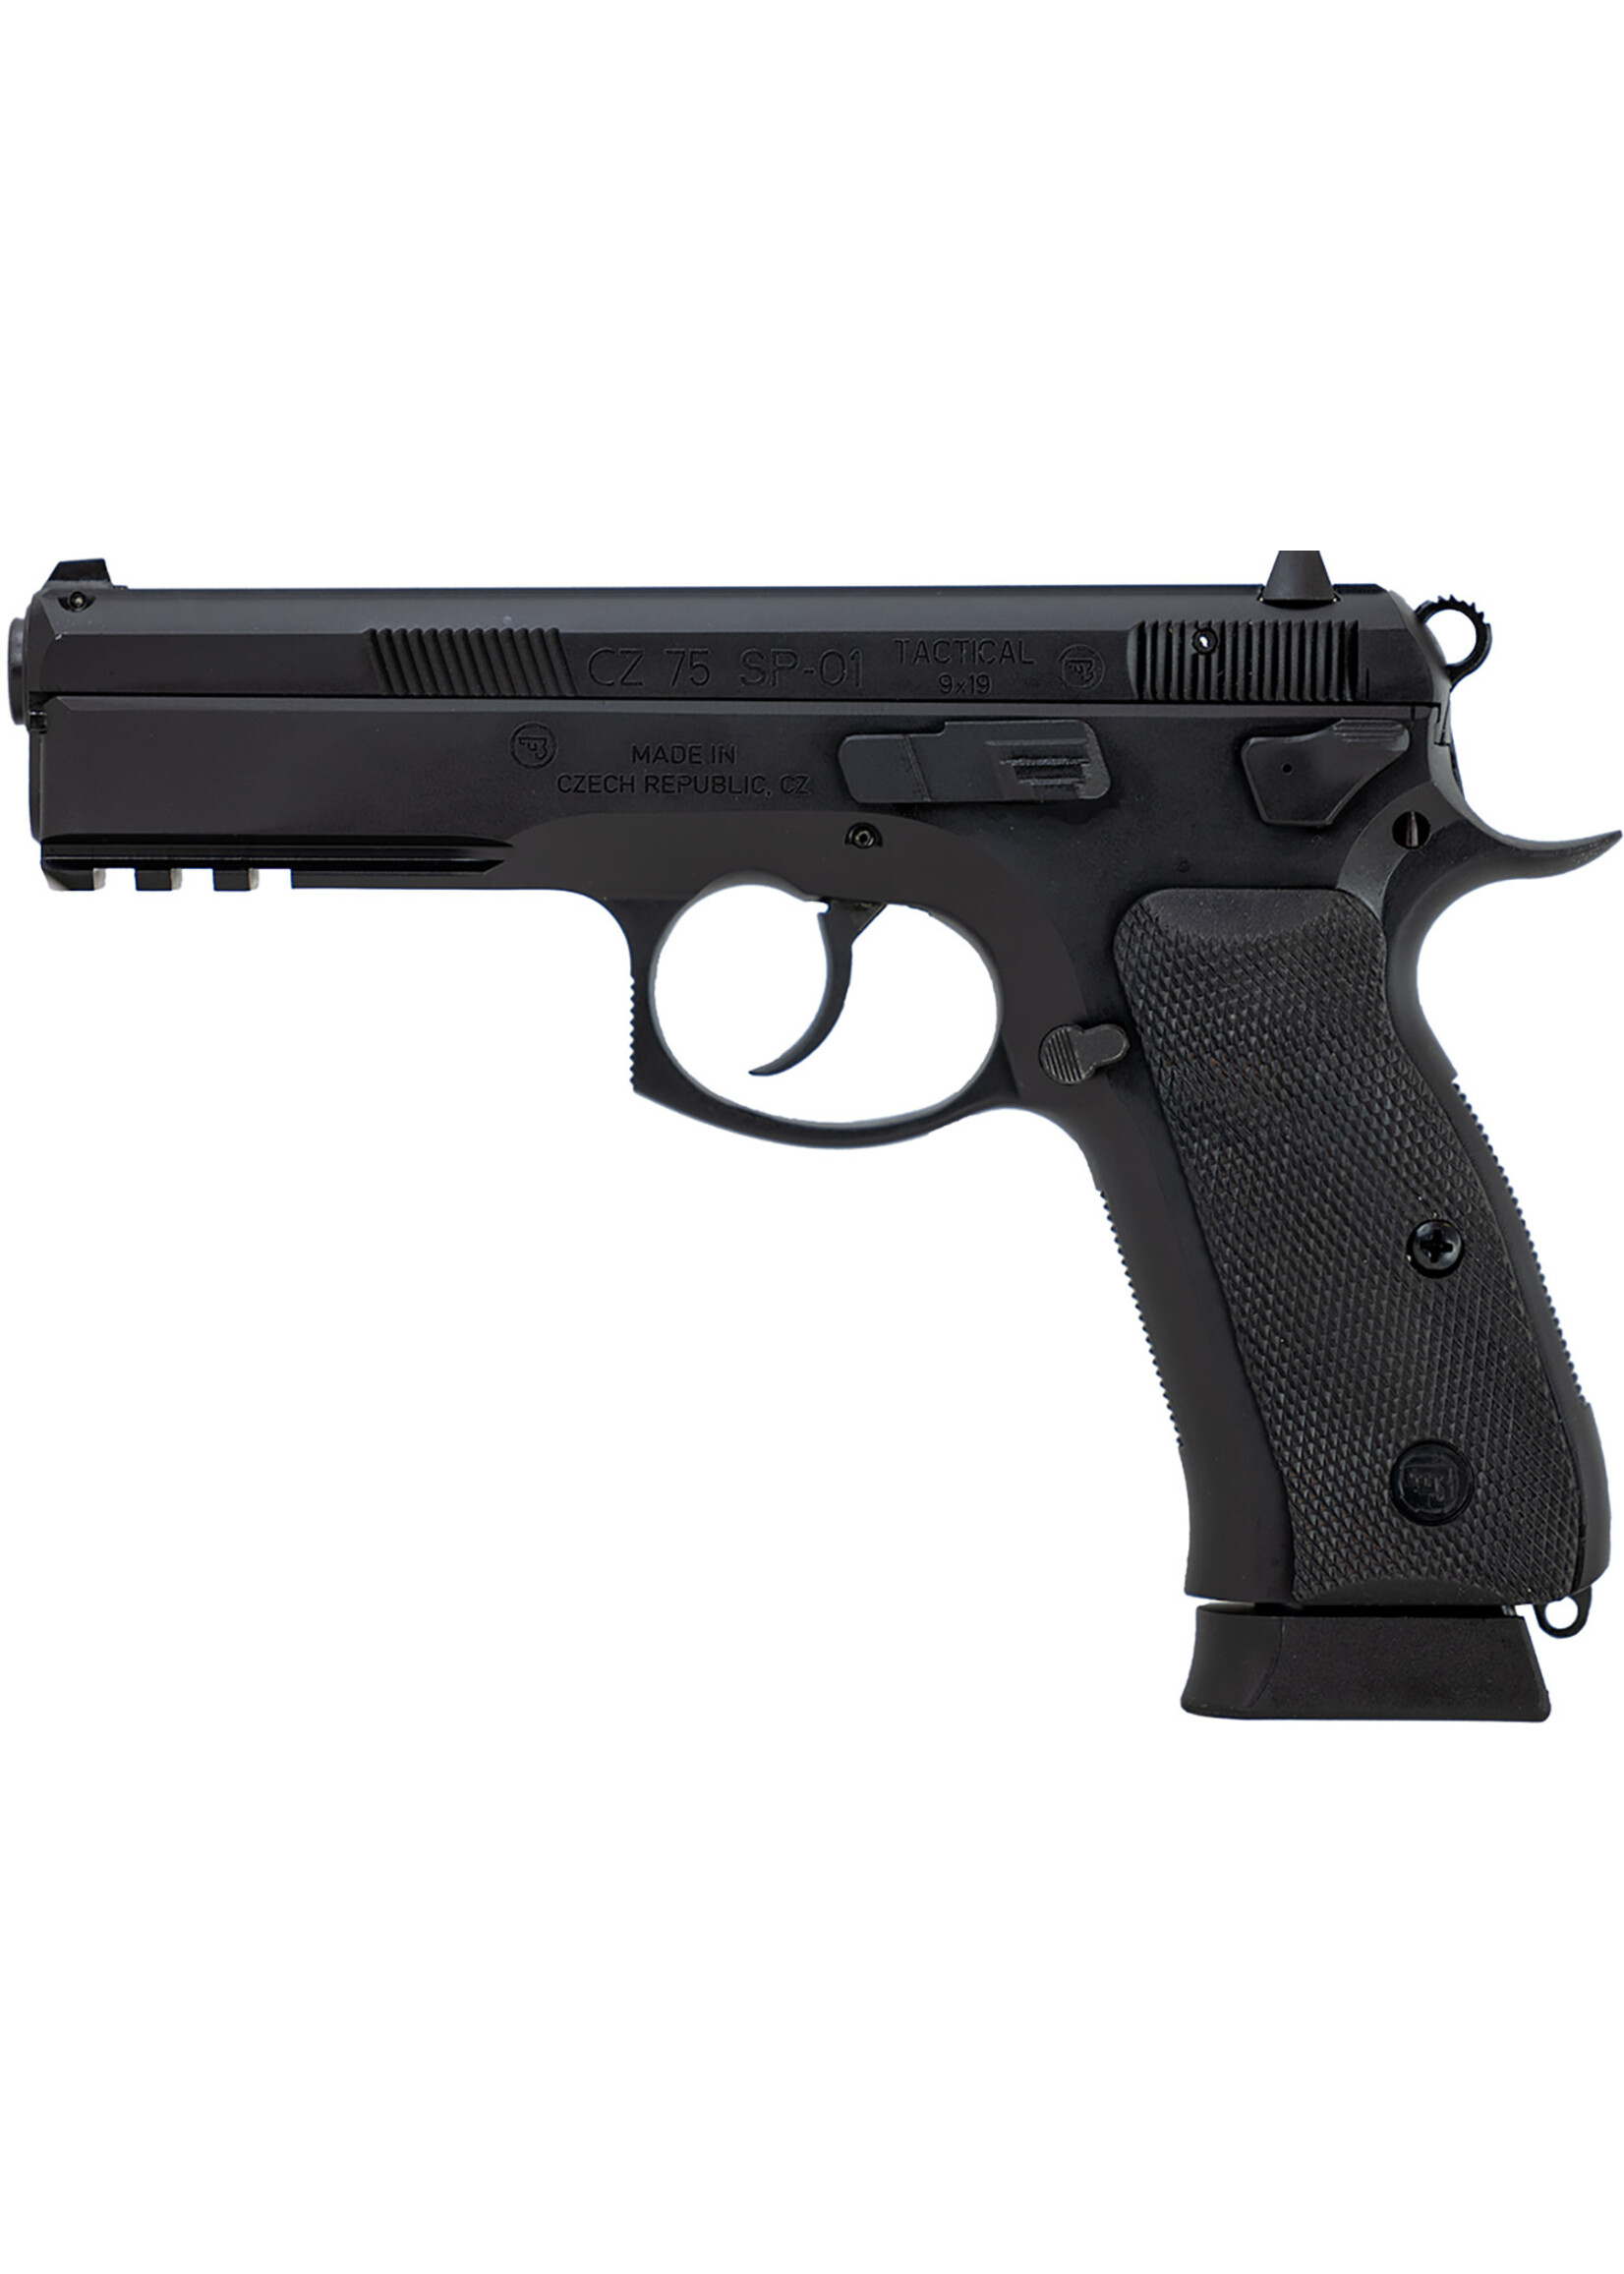 CZ USA CZ, 75 SP-01 Tactical, Semi-Automatic, DA/SA, Full Size, 9MM, 4.6" Cold Hammer Forged Barrel, Steel Frame, Black Finish, Rubber Grips, Luminescent 3 Dot Sights, Decocker, 2 Magazines, 19 Rounds